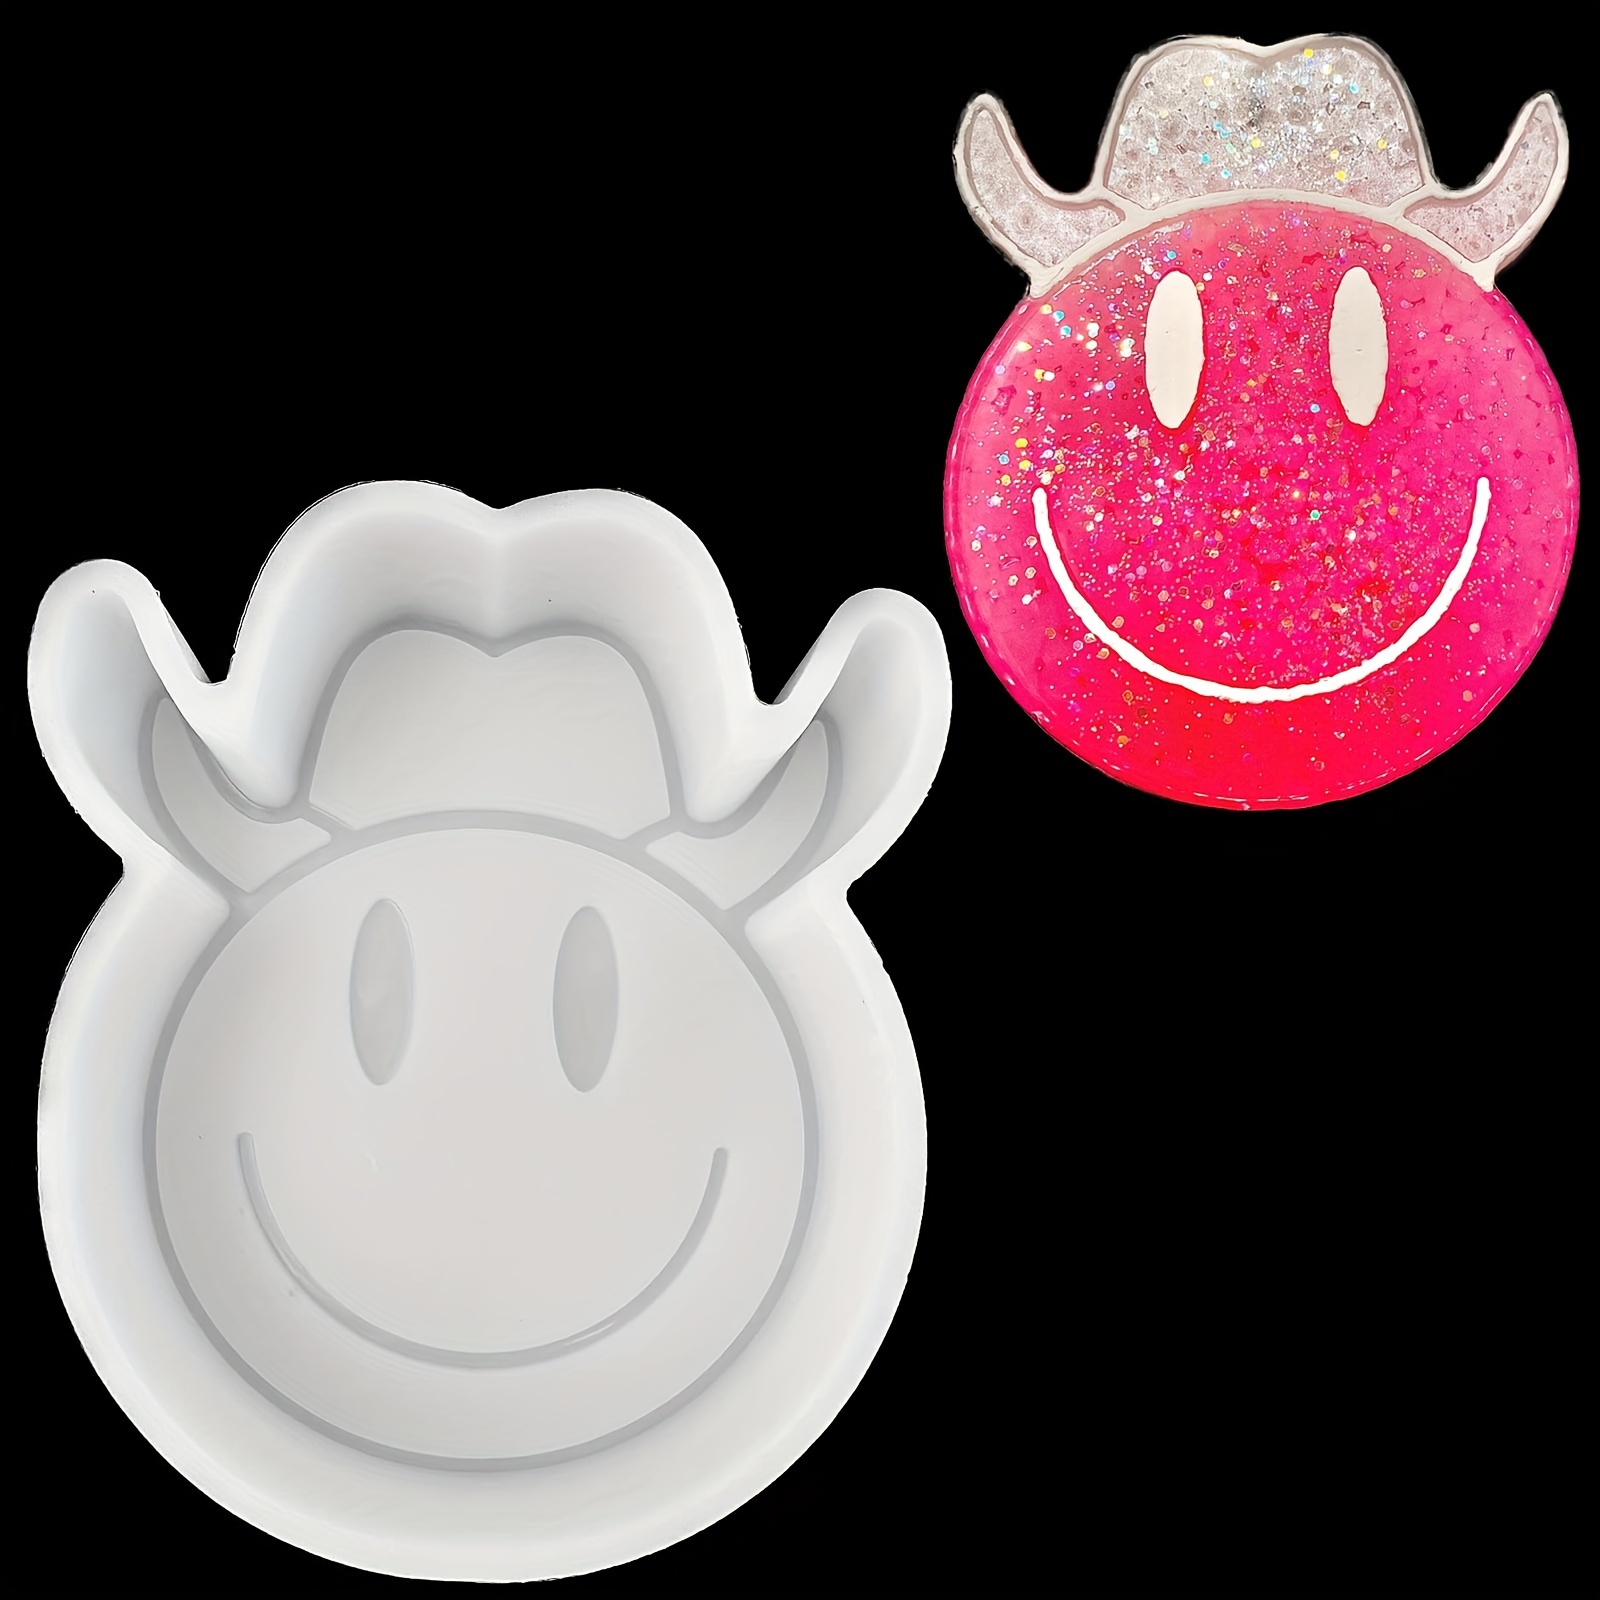 

Smiling Face In Cowboy Hat Car Freshie Mold, Silicone Freshie Mold, Silicone Resin Mold For Freshie Making Aroma Bead, Candle, Soap, Resin, Wax Melt, Pendant, Diy Crafts